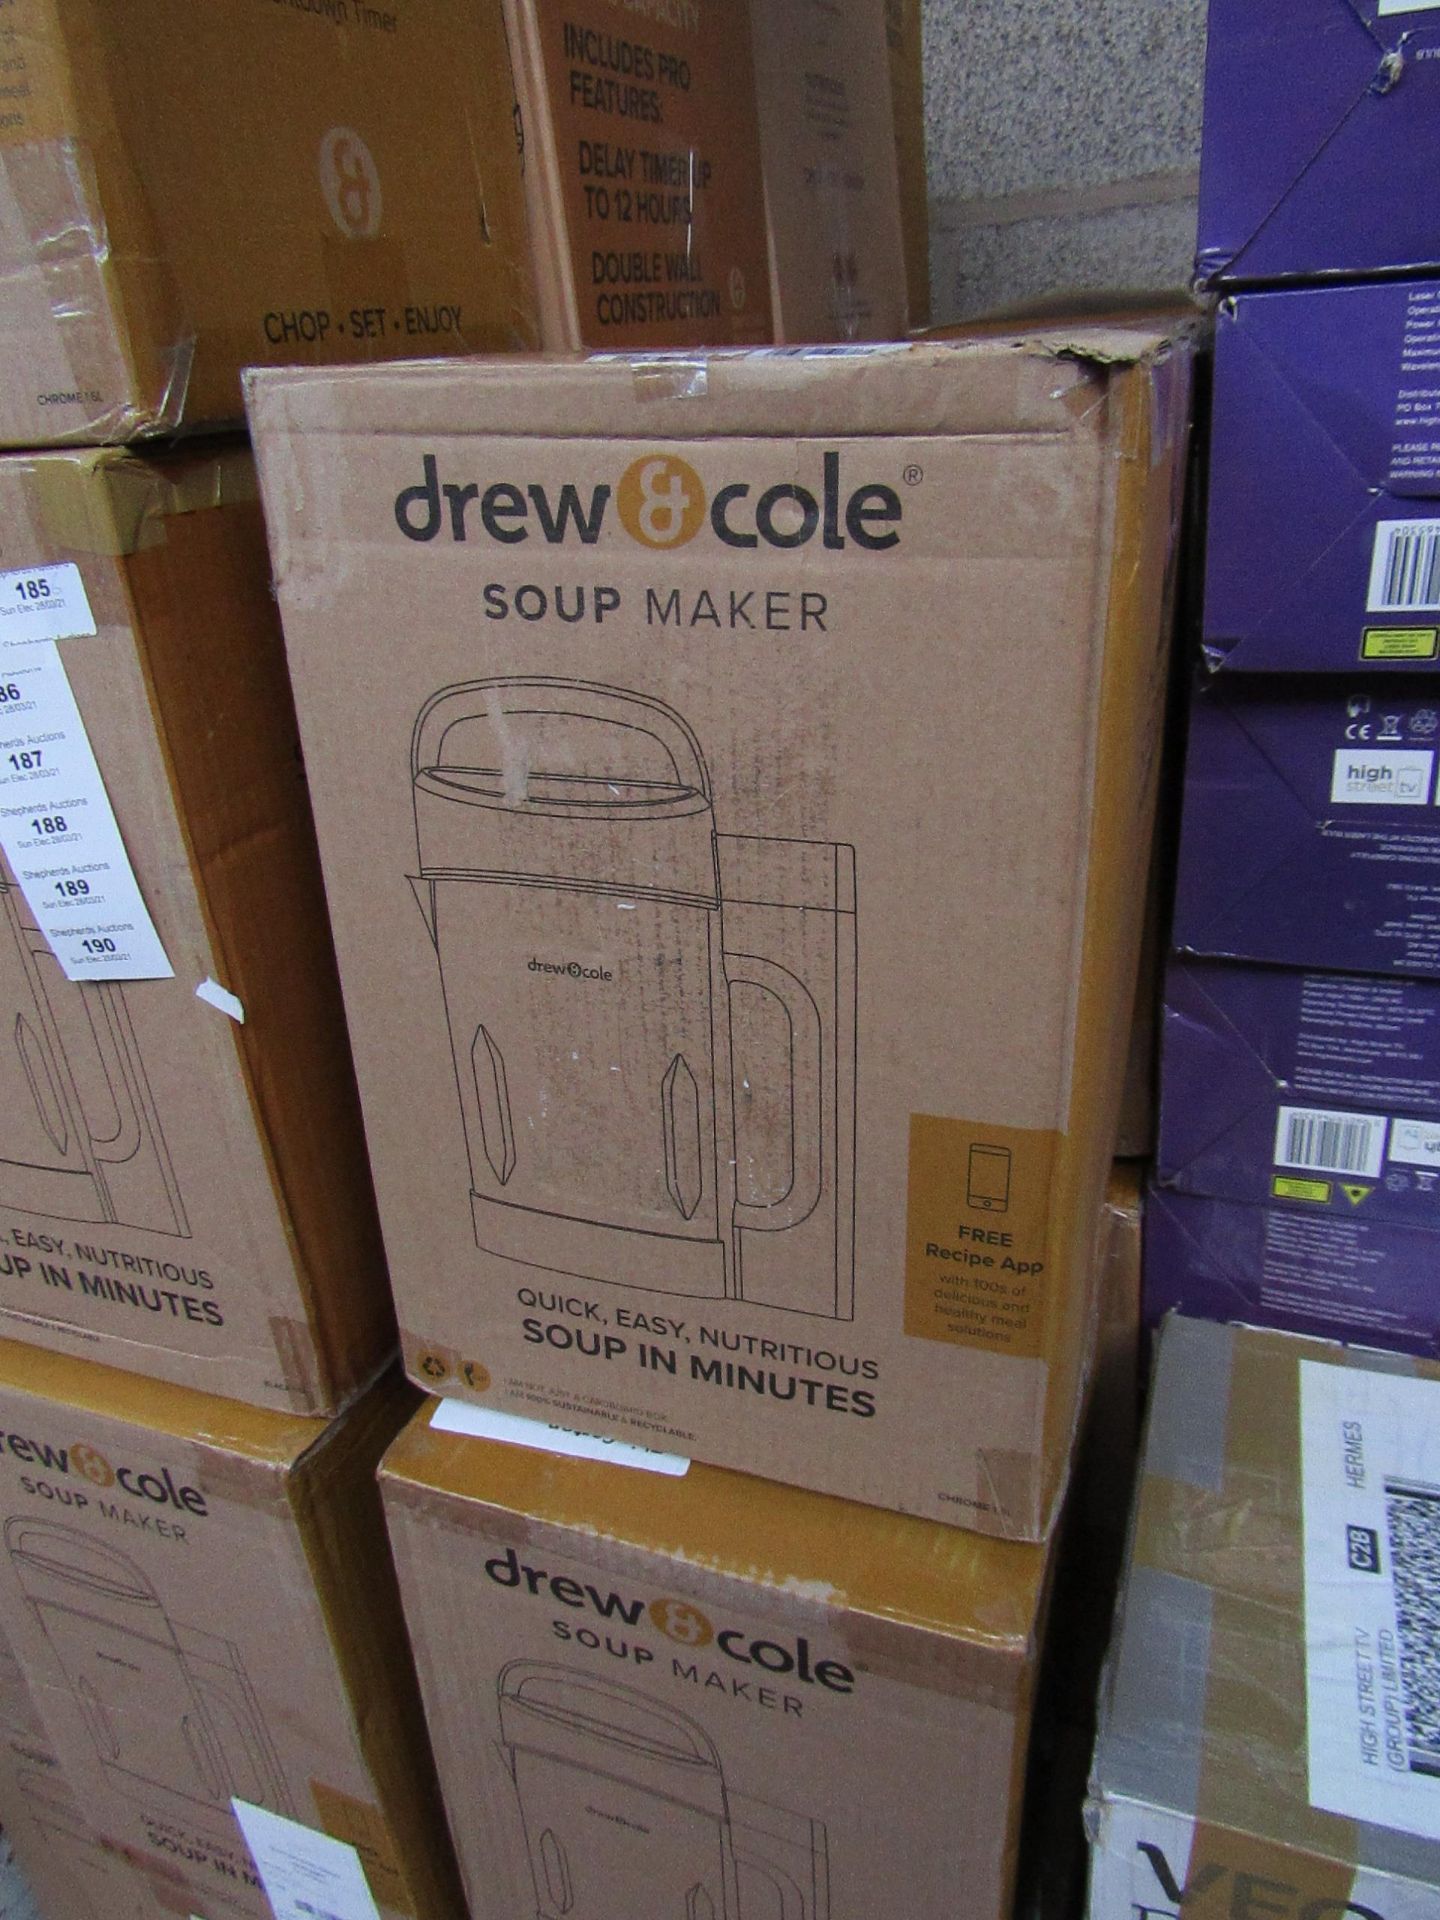 | 6X | DREW AND COLE SOUP CHEF | BOXED AND UNCHECKED | NO ONLINE RESALE | SKU C5060541516809 |